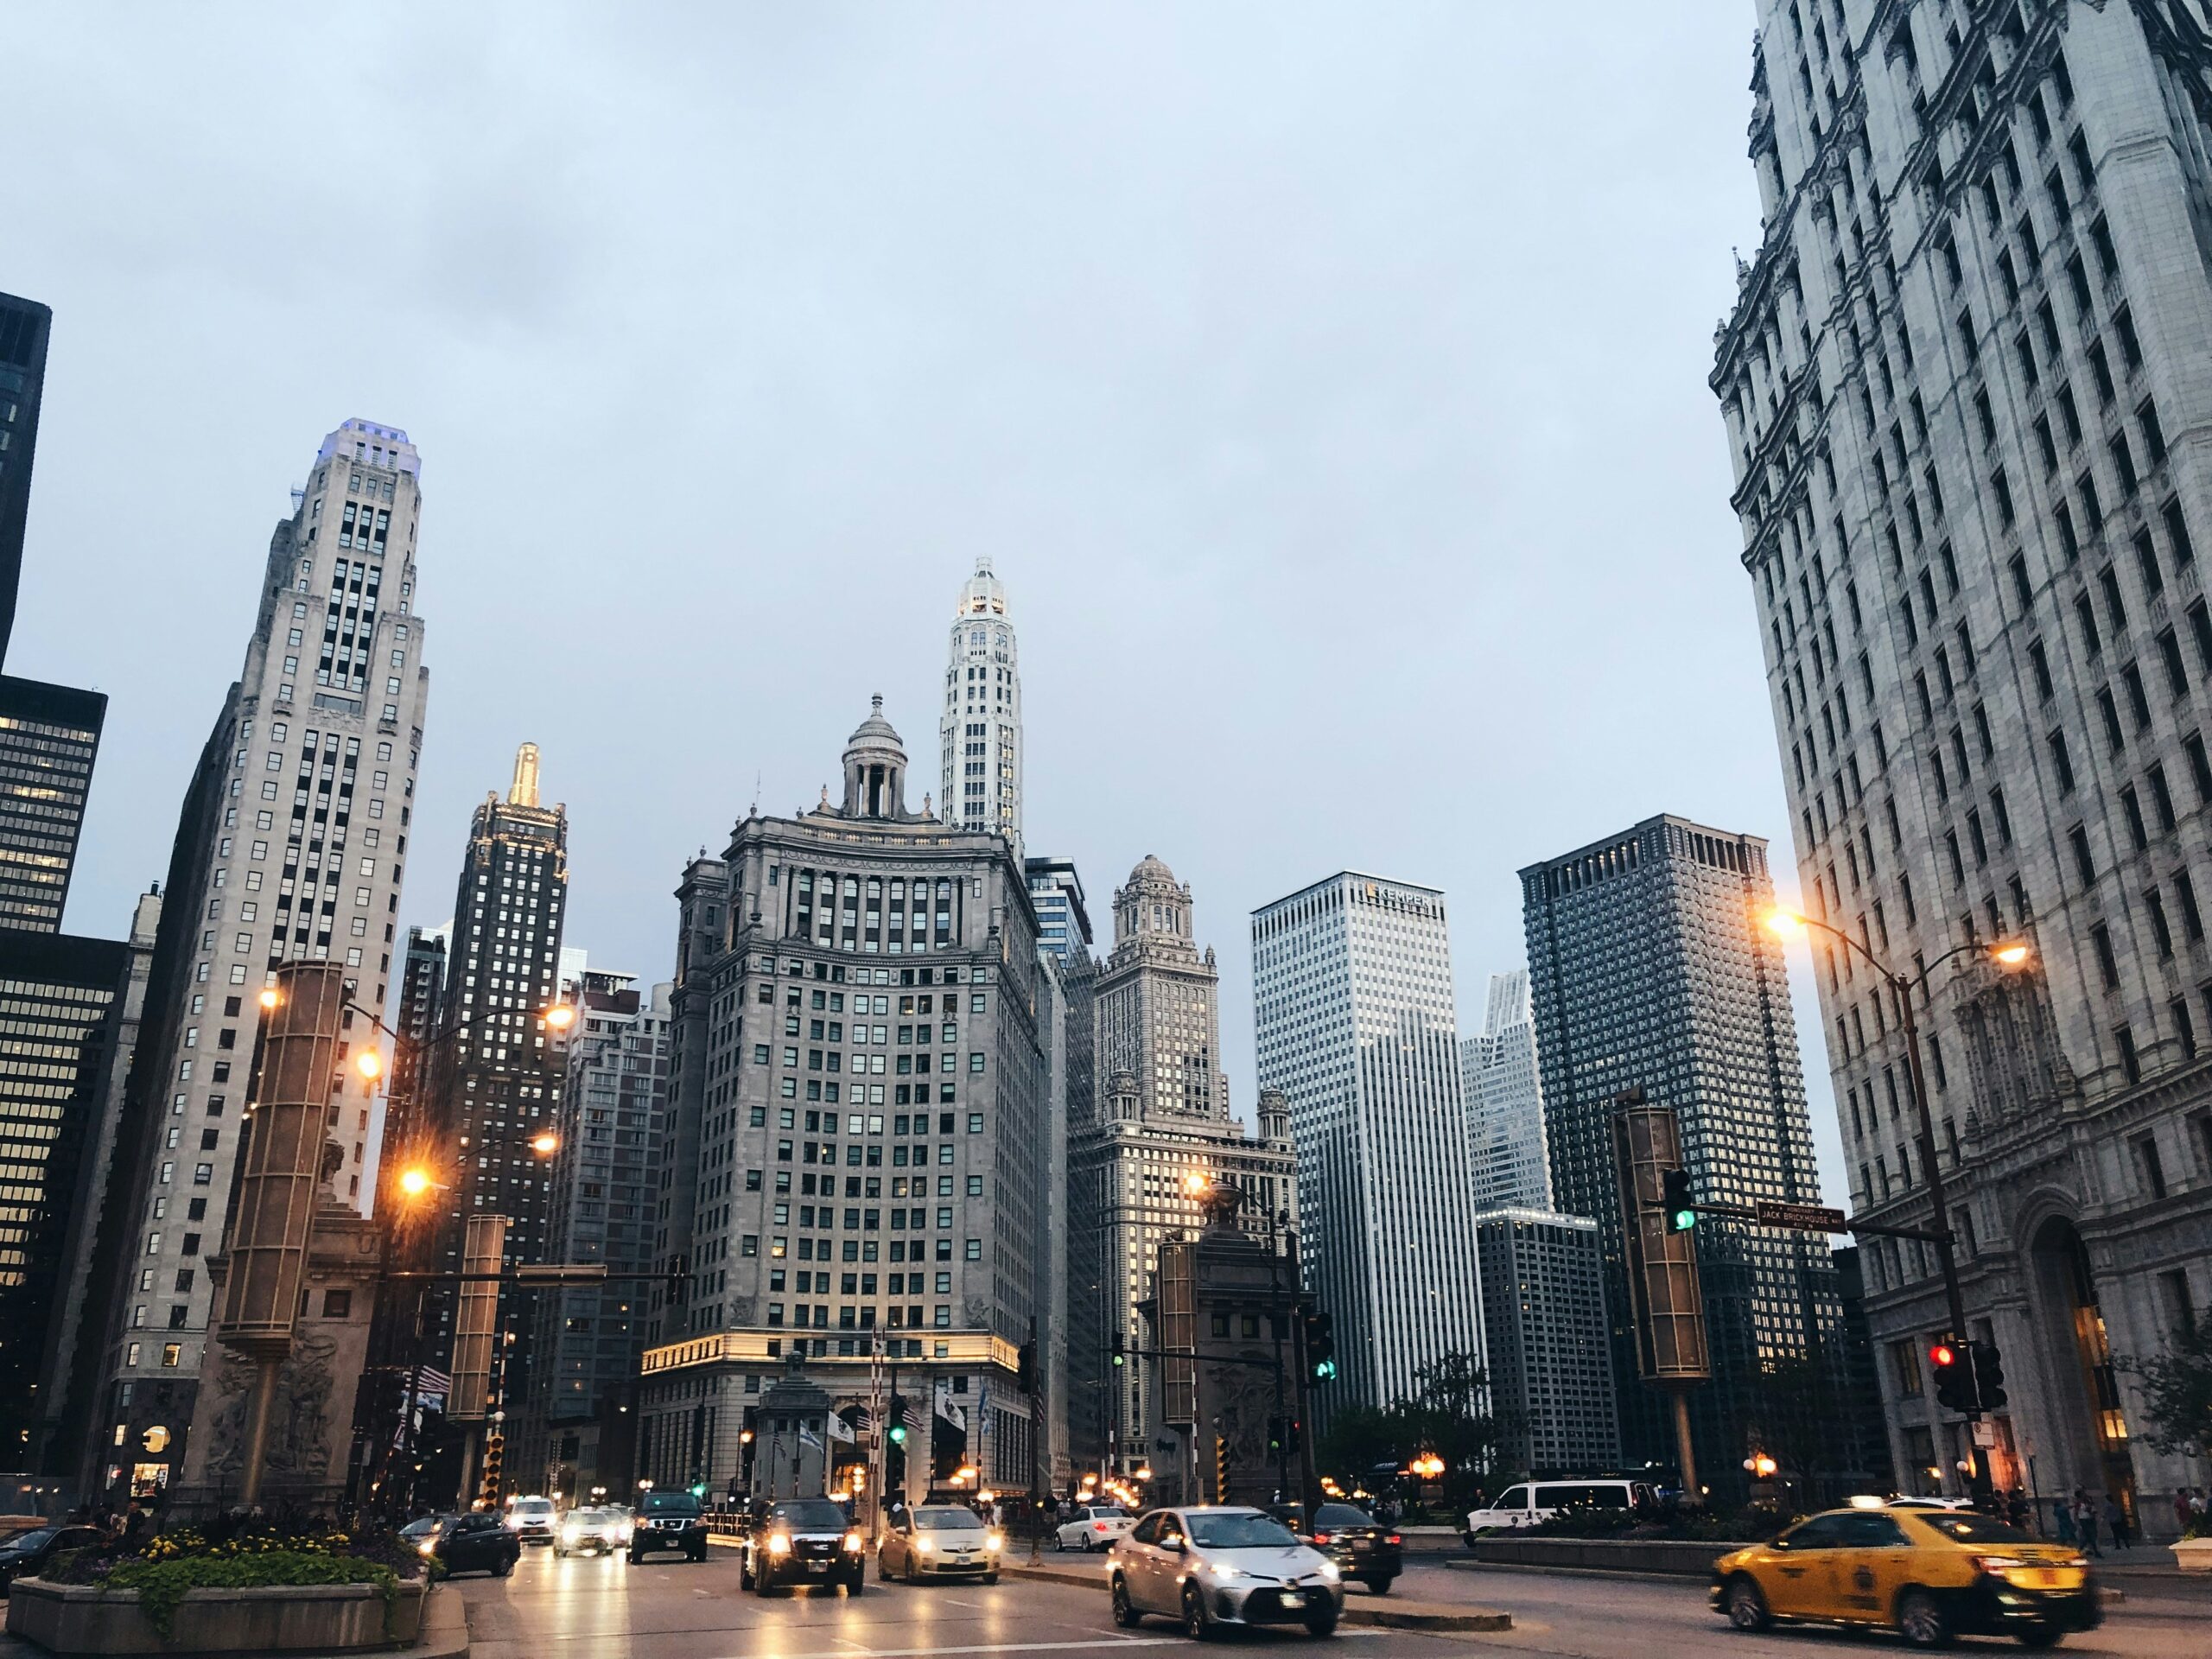 A picture of buildings in Chicago on a grey day